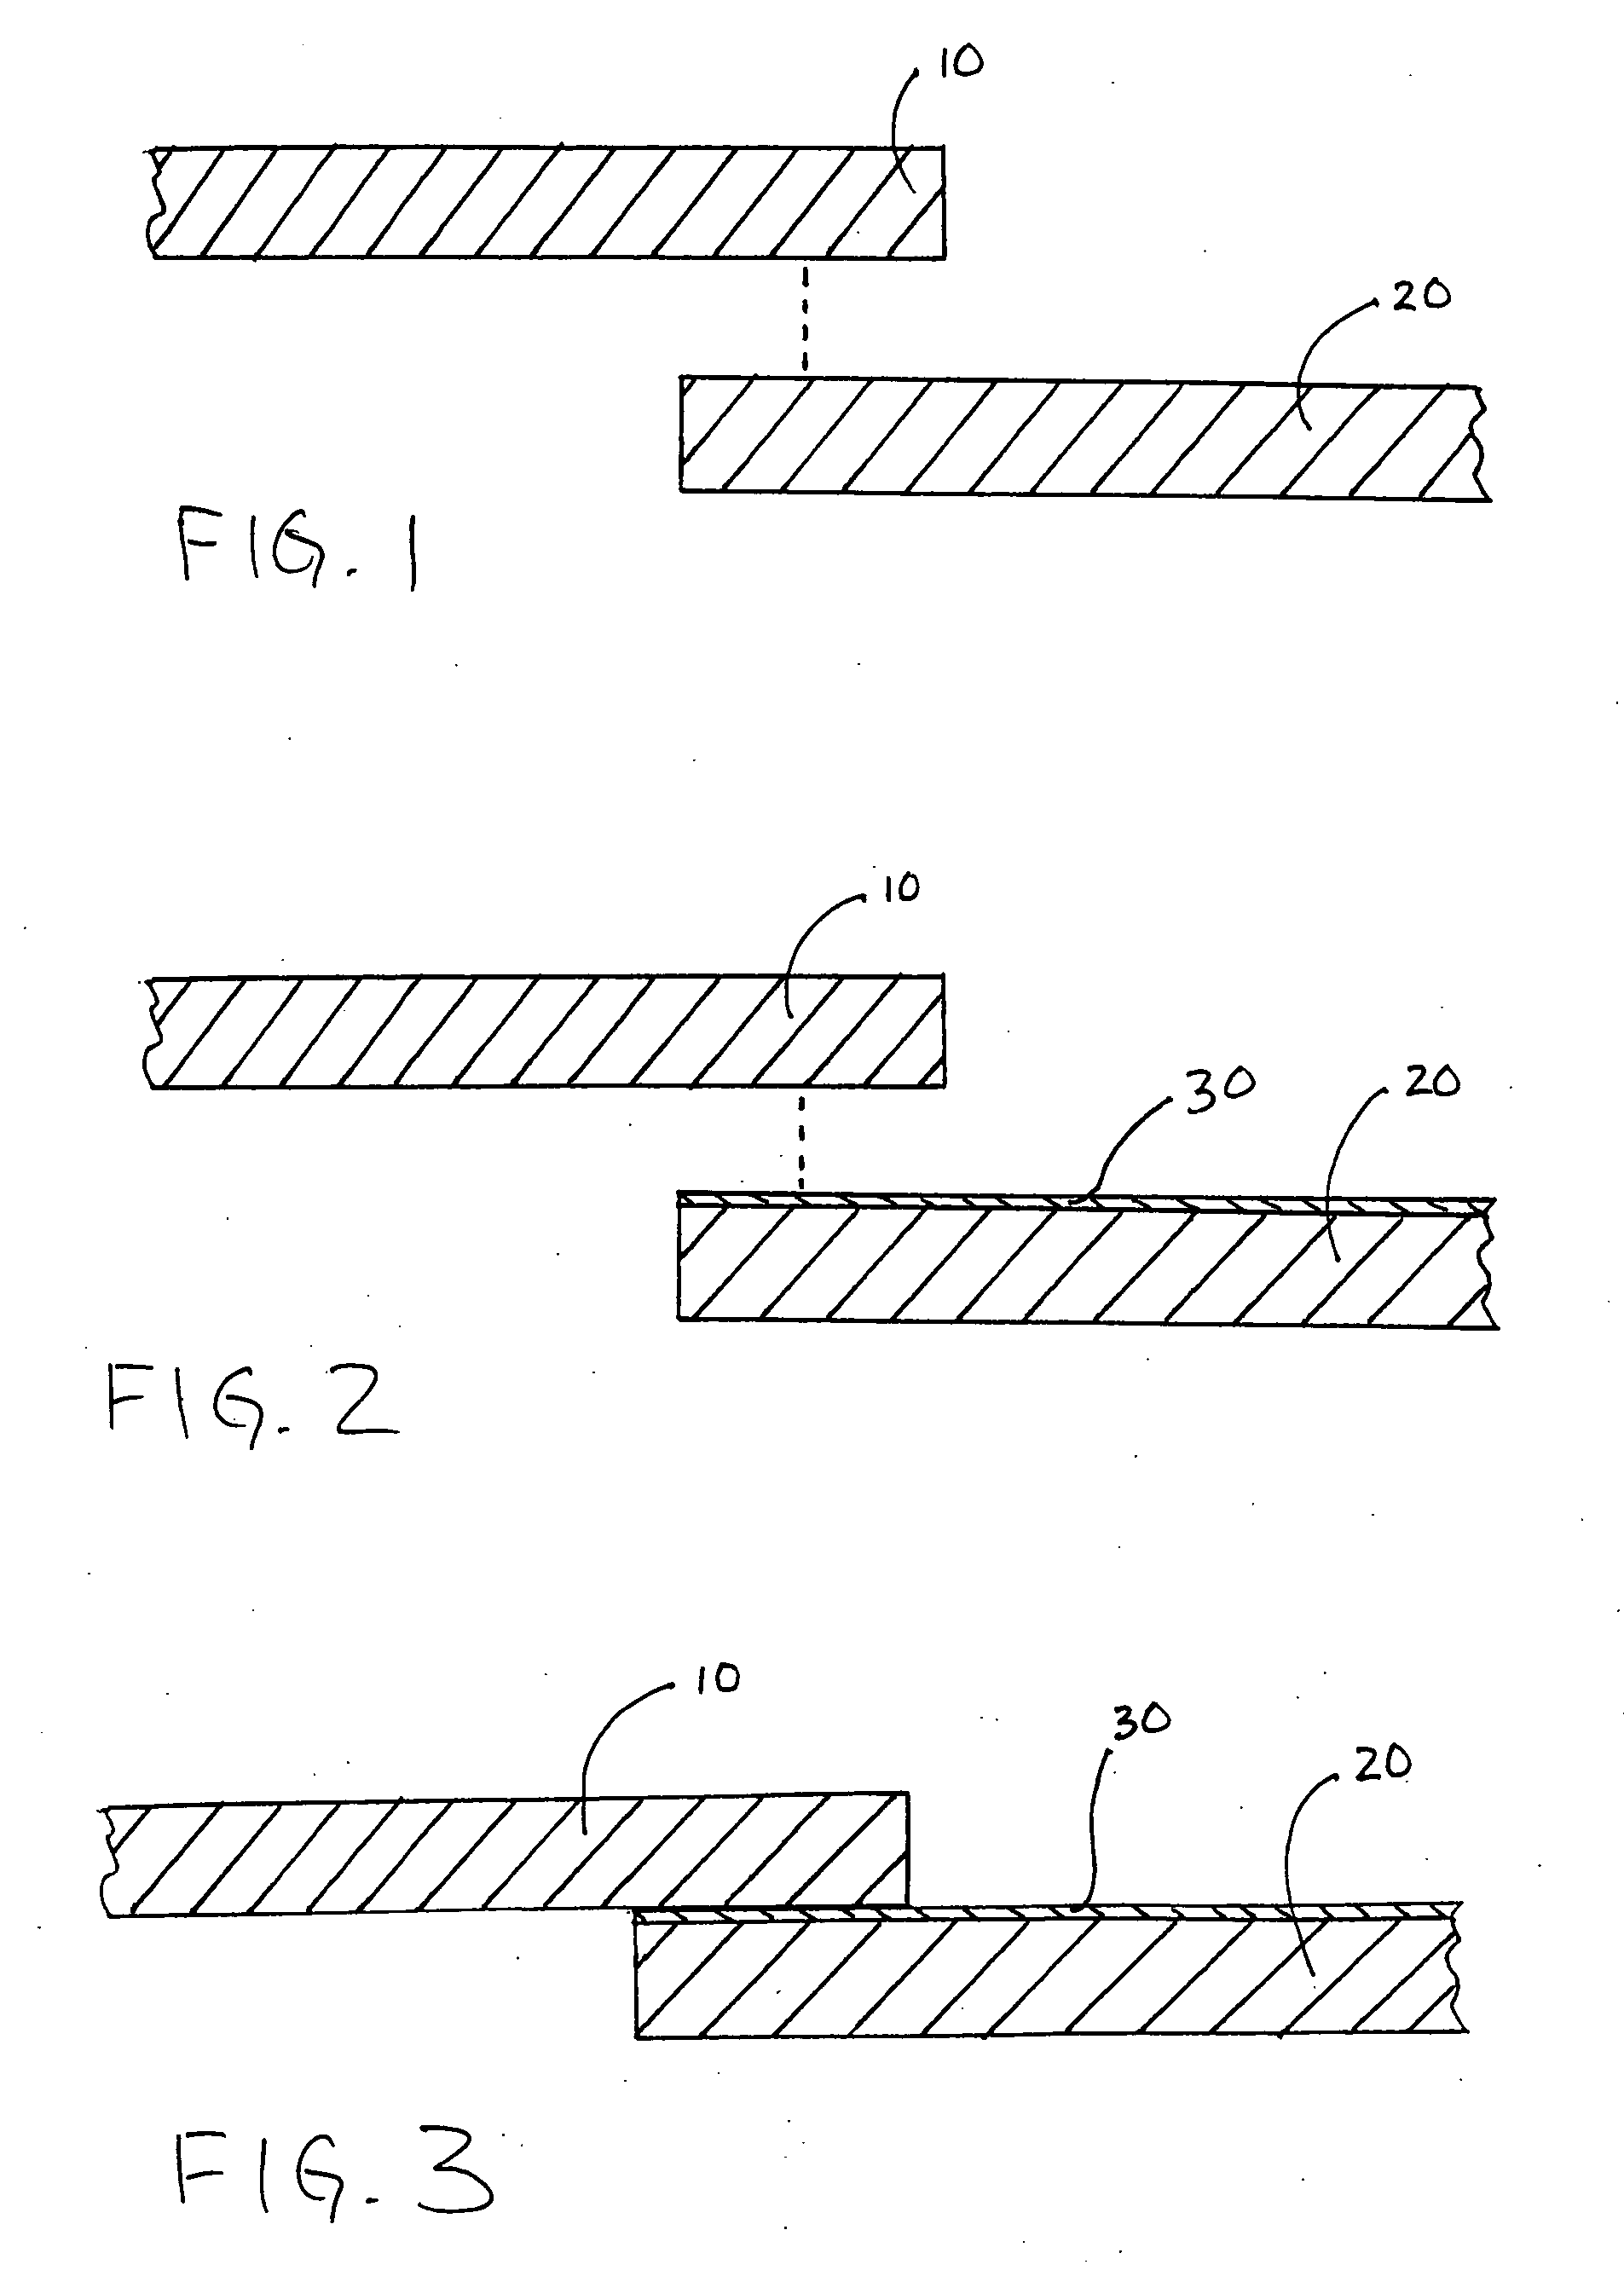 Method of permanently joining components formed from metallic materials